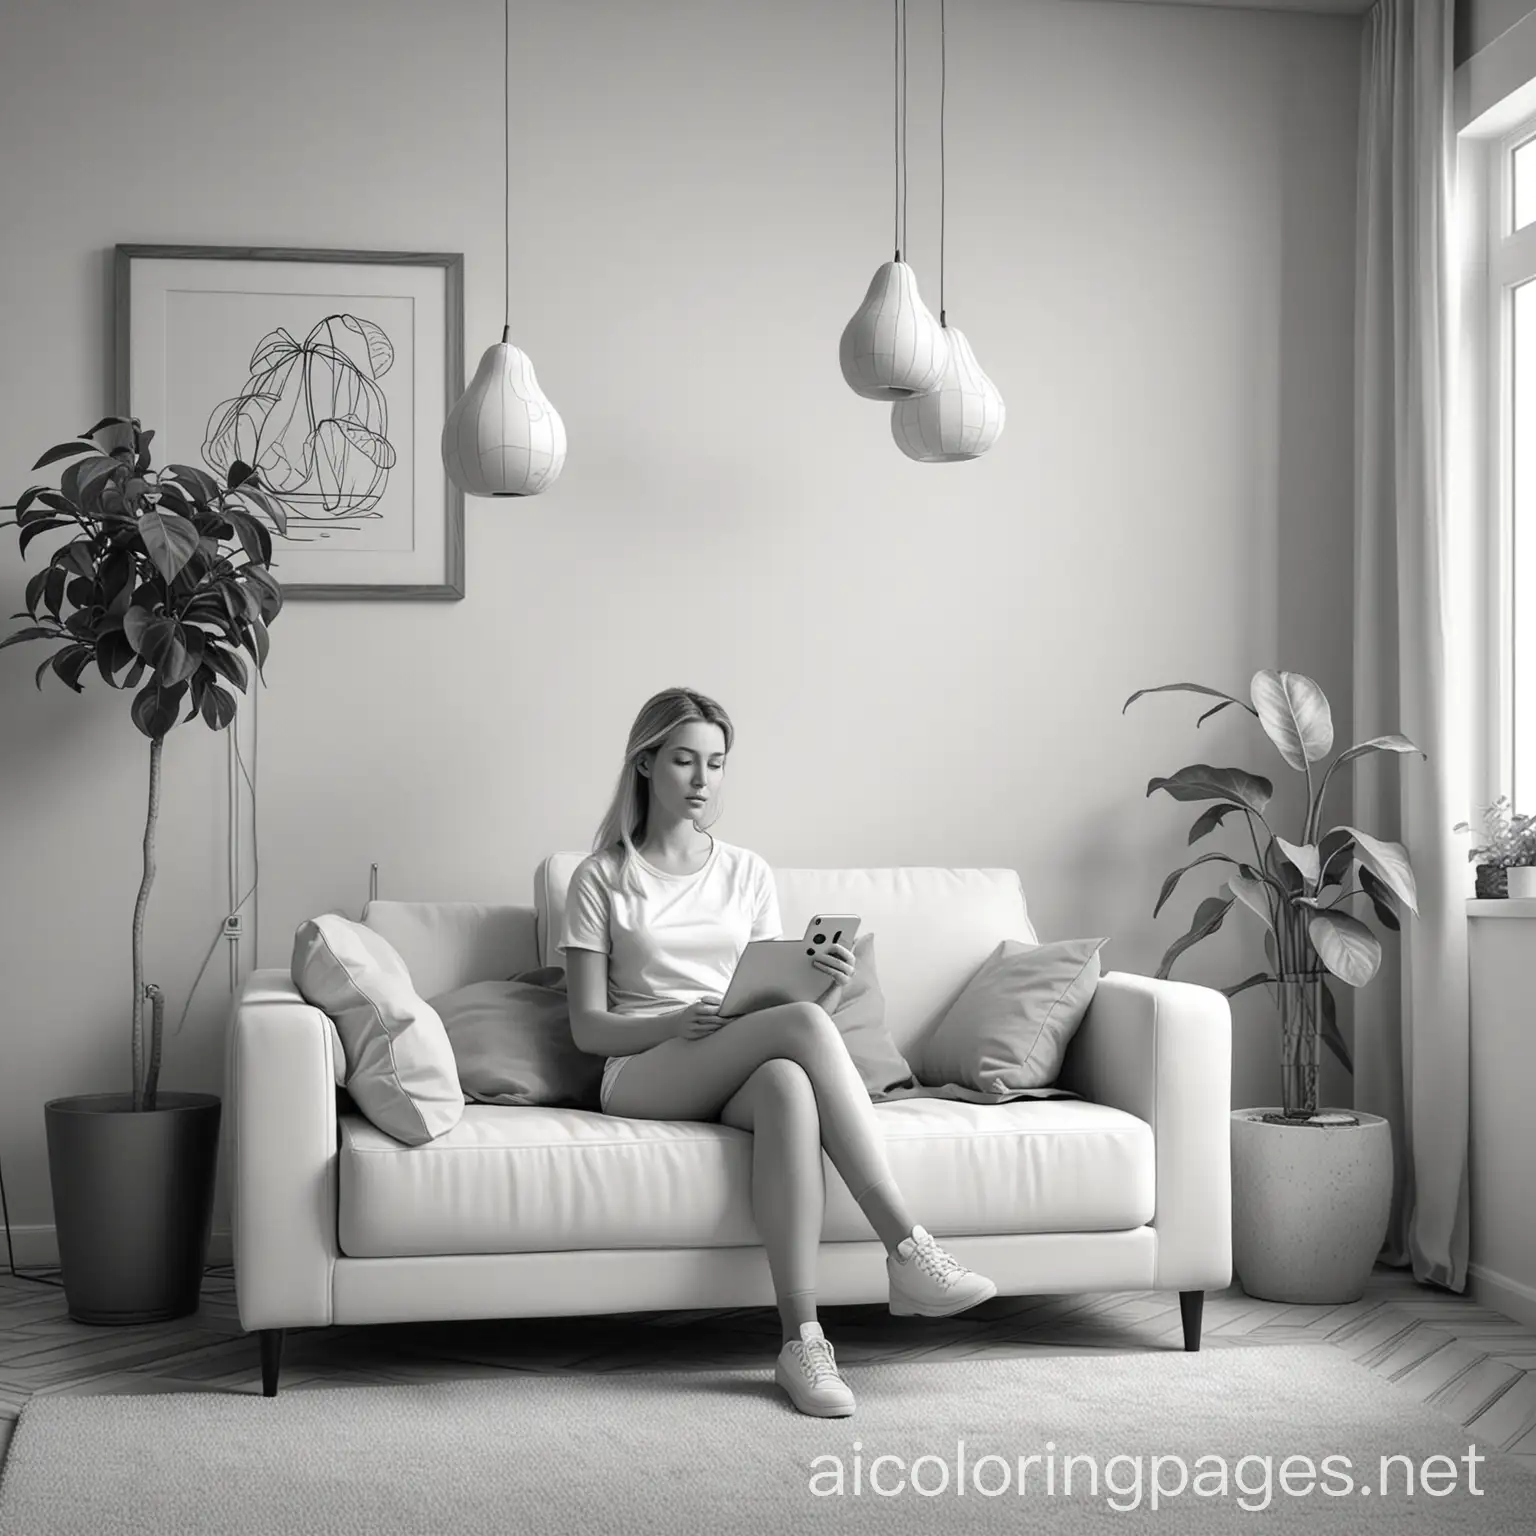 A captivating 3D animation scene featuring three fruits in a dimly lit industrial space. A pear, wearing a surprised expression, stands. Beautiful Caucasian Female Using Smartphone in Stylish Living Room while Resting on a Cozy Couch Sofa. Young Woman at Home, Browsing Internet, Using Social Networks, Having Fun in Flat., Coloring Page, black and white, line art, white background, Simplicity, Ample White Space. The background of the coloring page is plain white to make it easy for young children to color within the lines. The outlines of all the subjects are easy to distinguish, making it simple for kids to color without too much difficulty